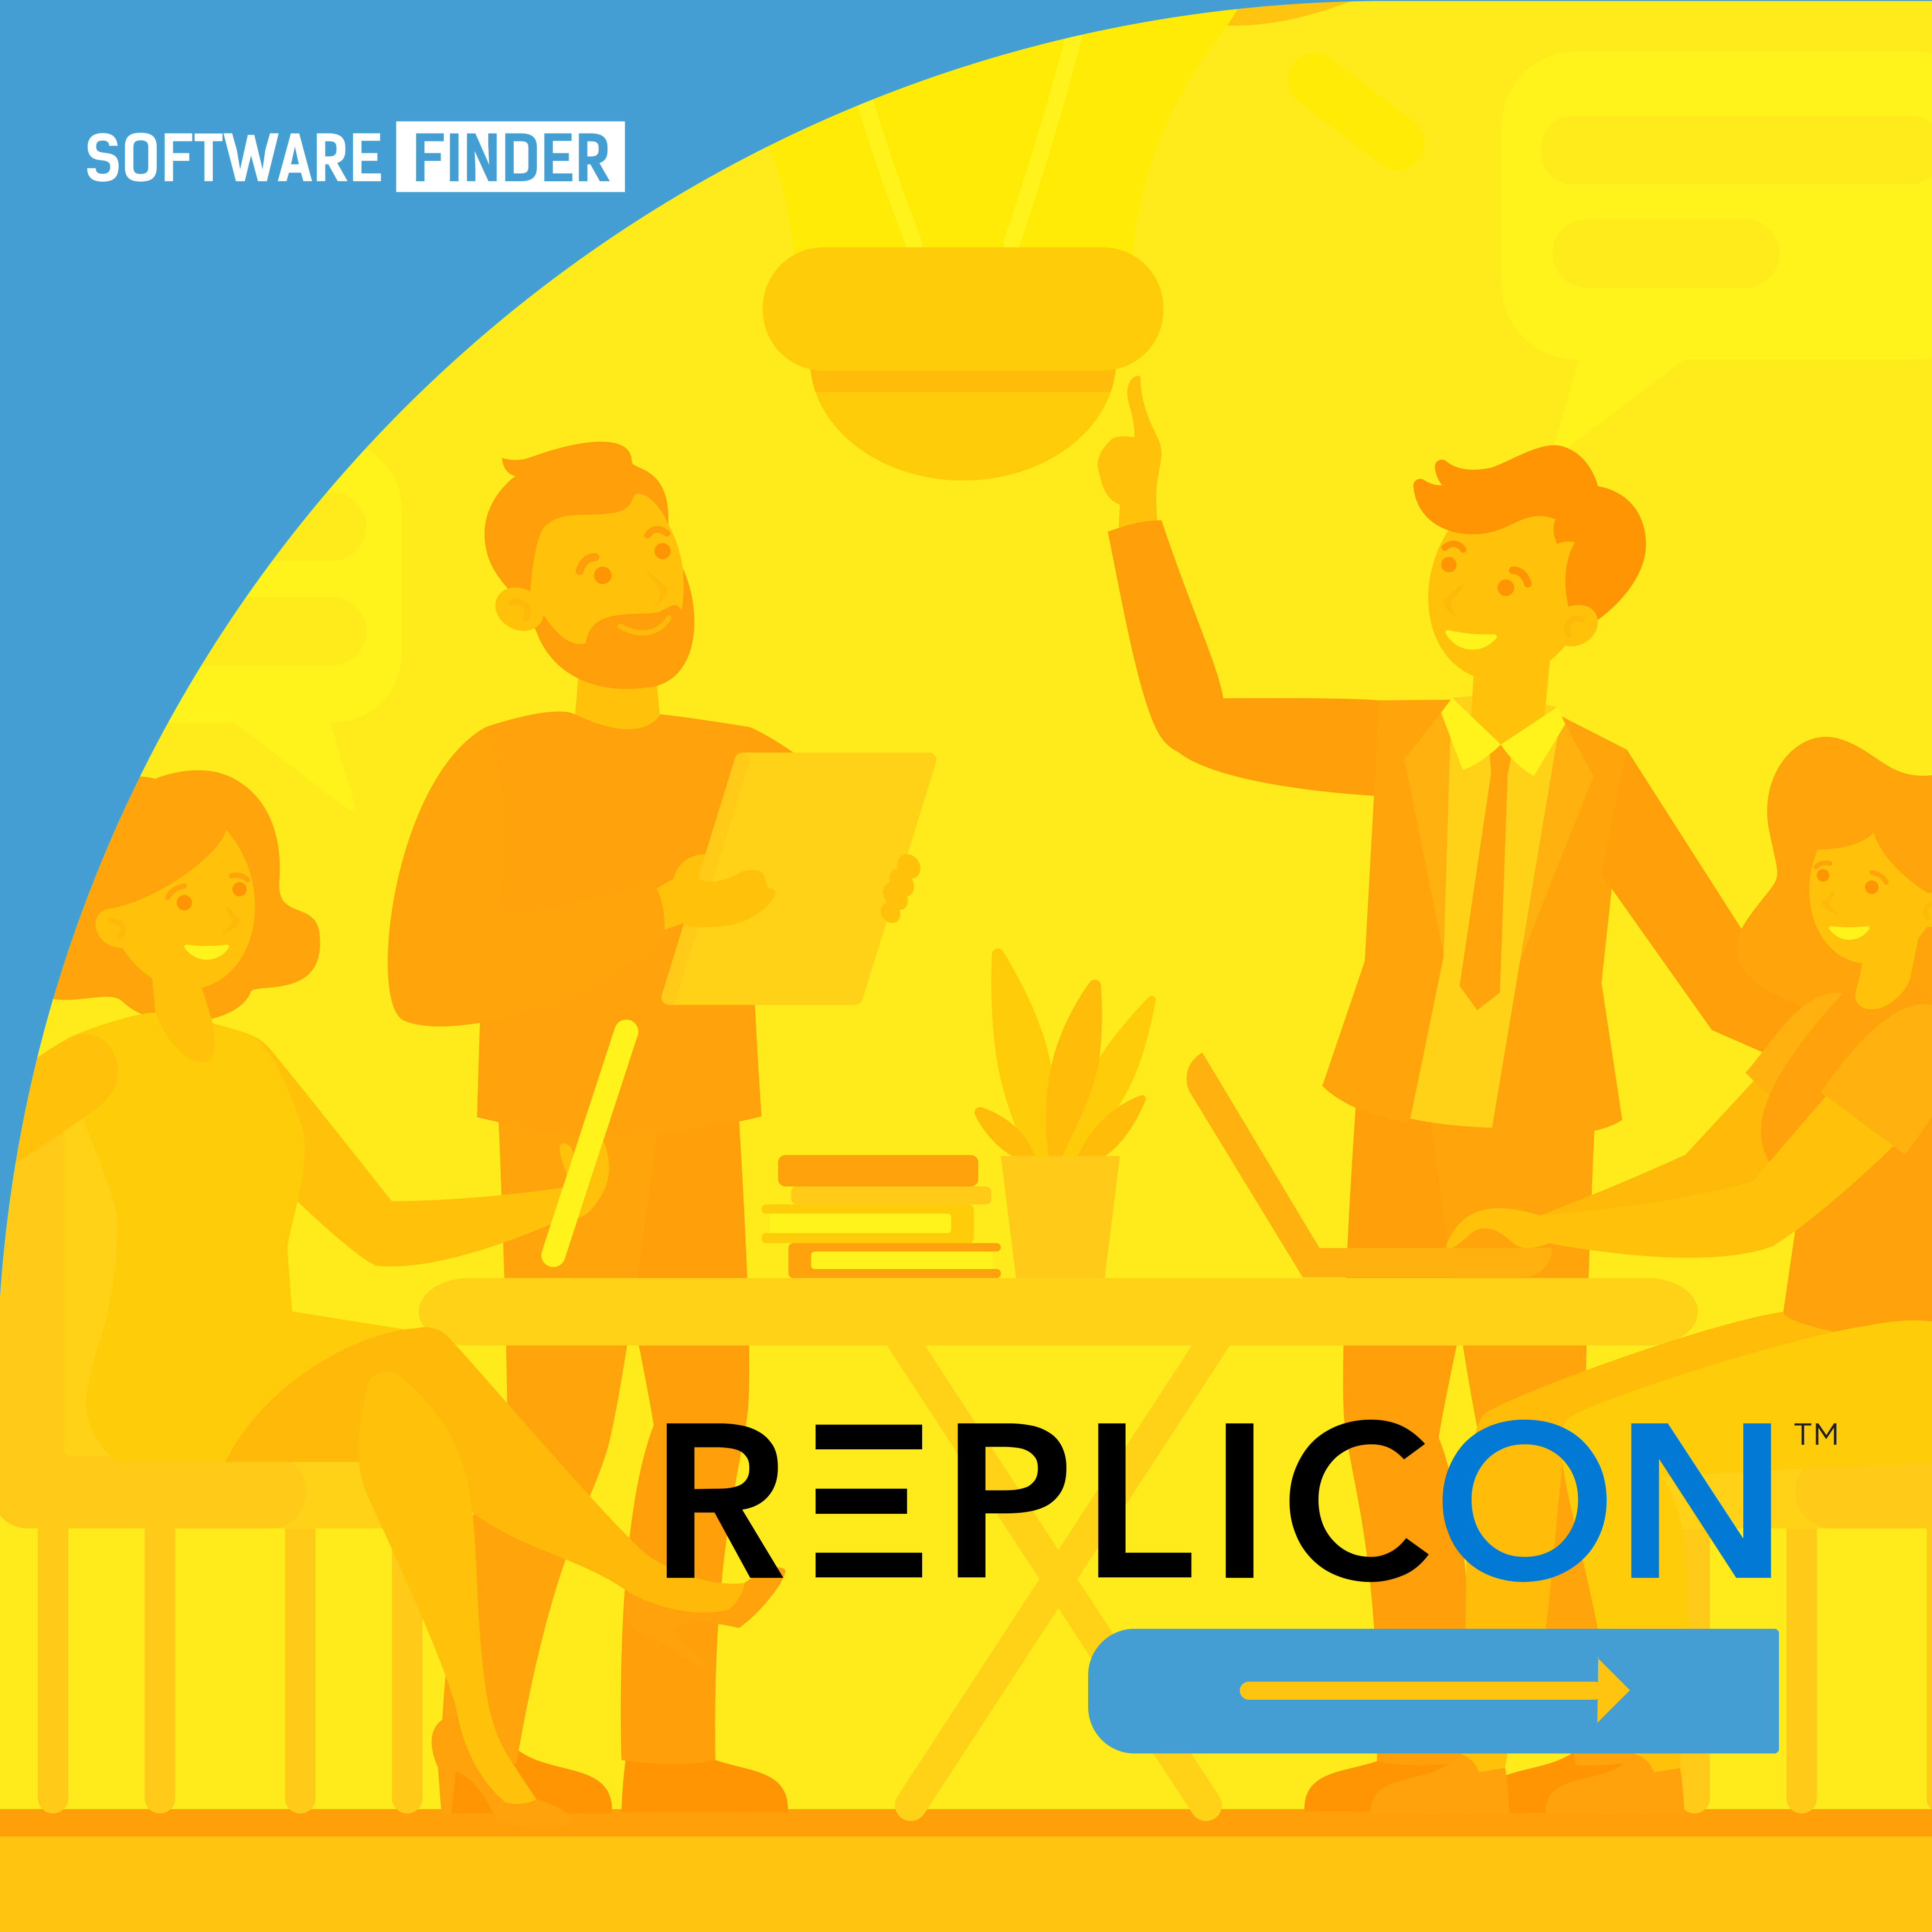 Replicon Rundown; Features, Pricing and More!